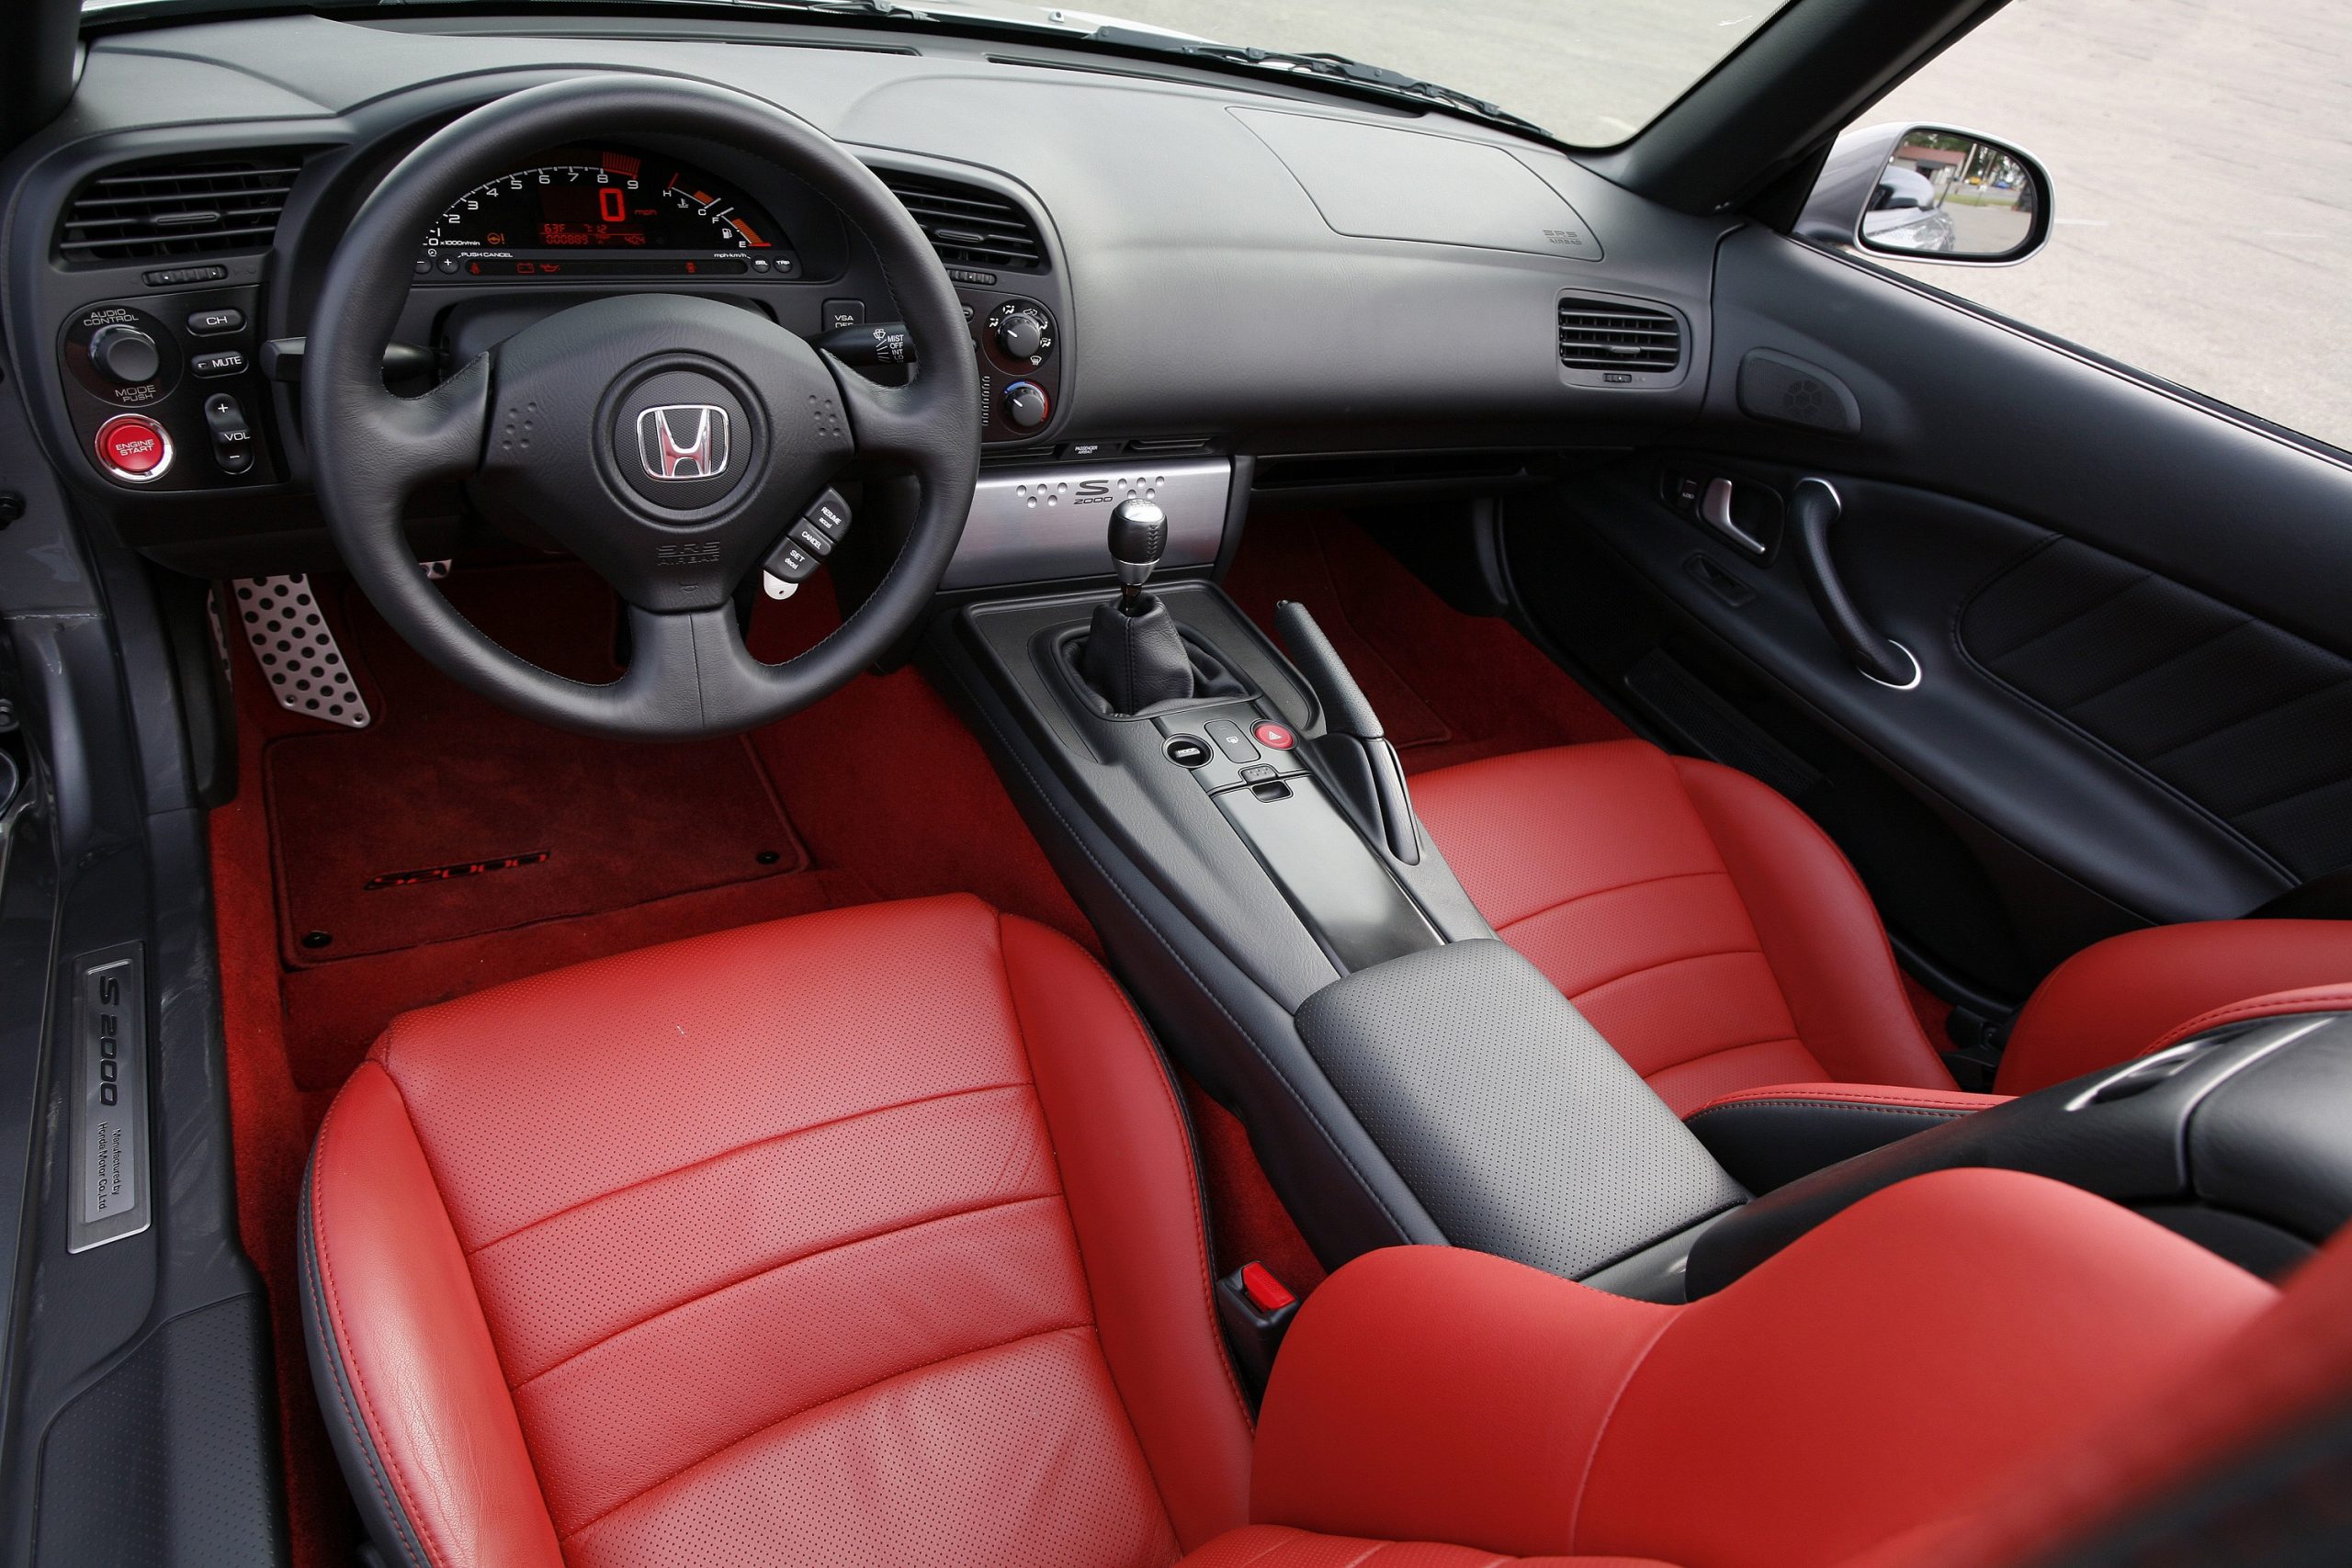 A red leather interior on a 2008 Honda S2000